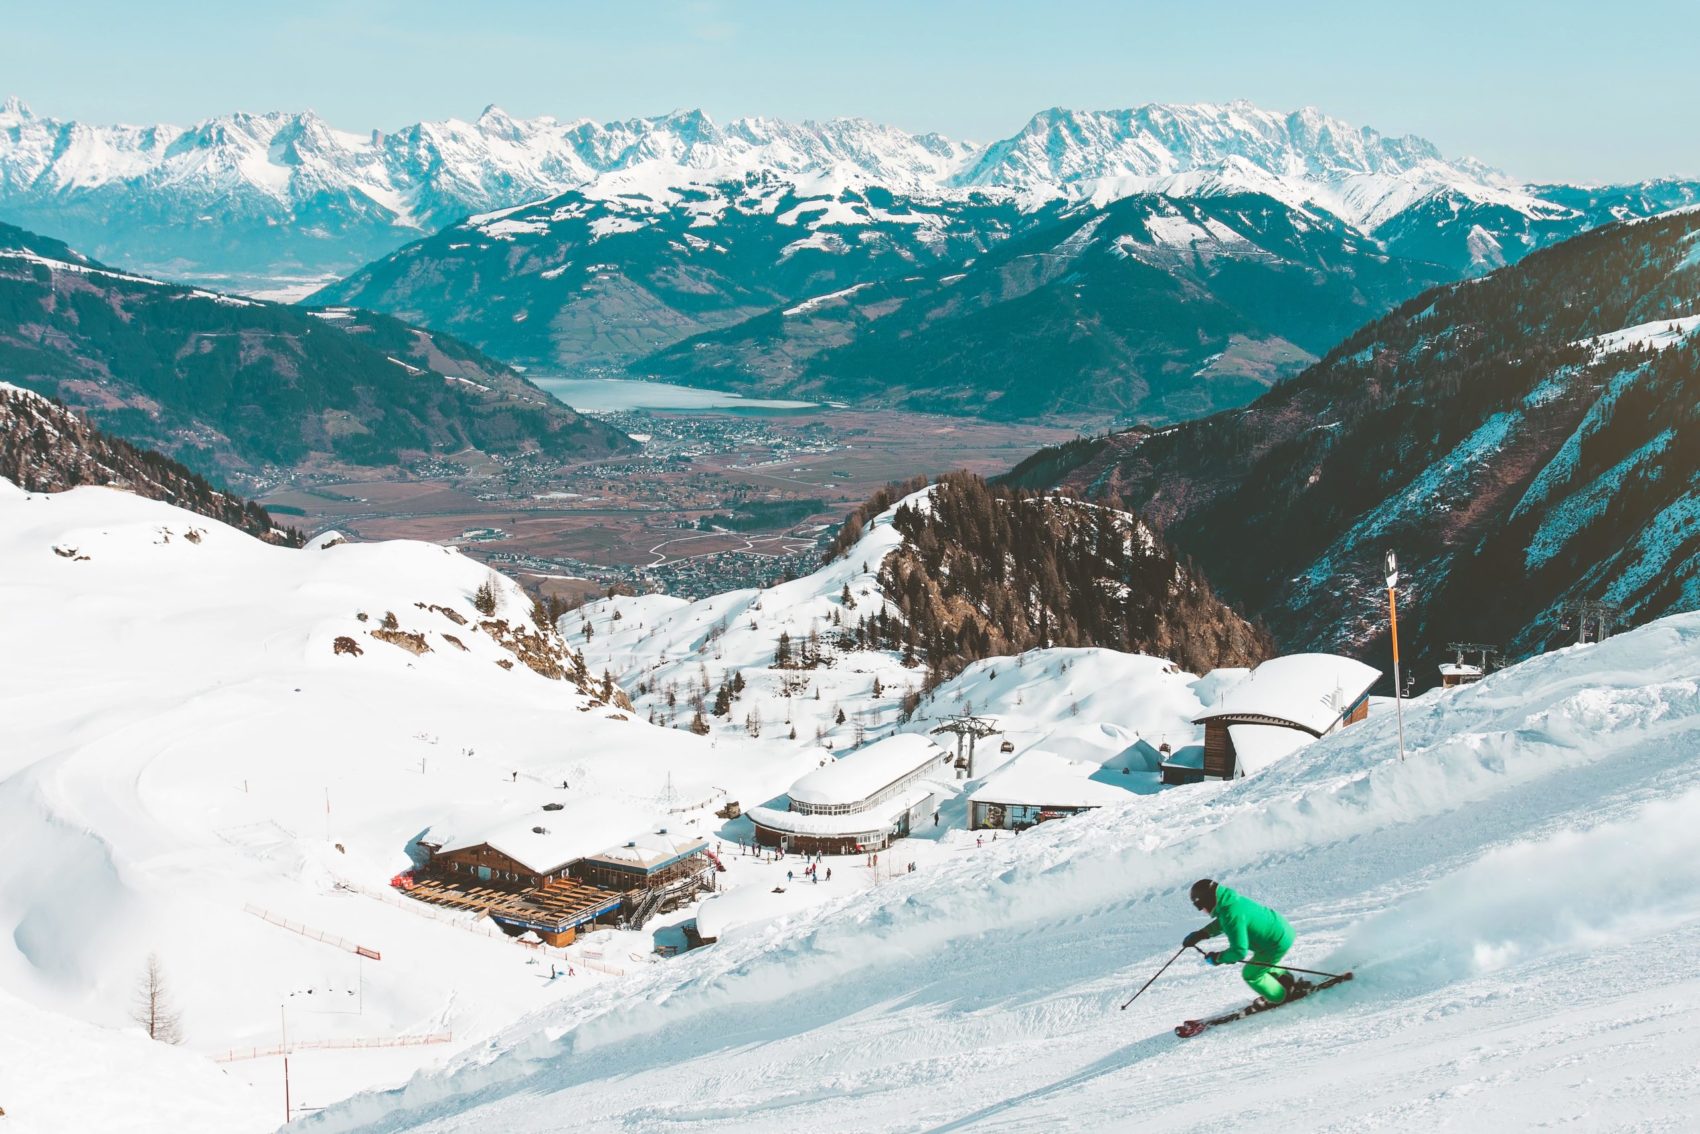 vail resorts plans for winter 2020/21